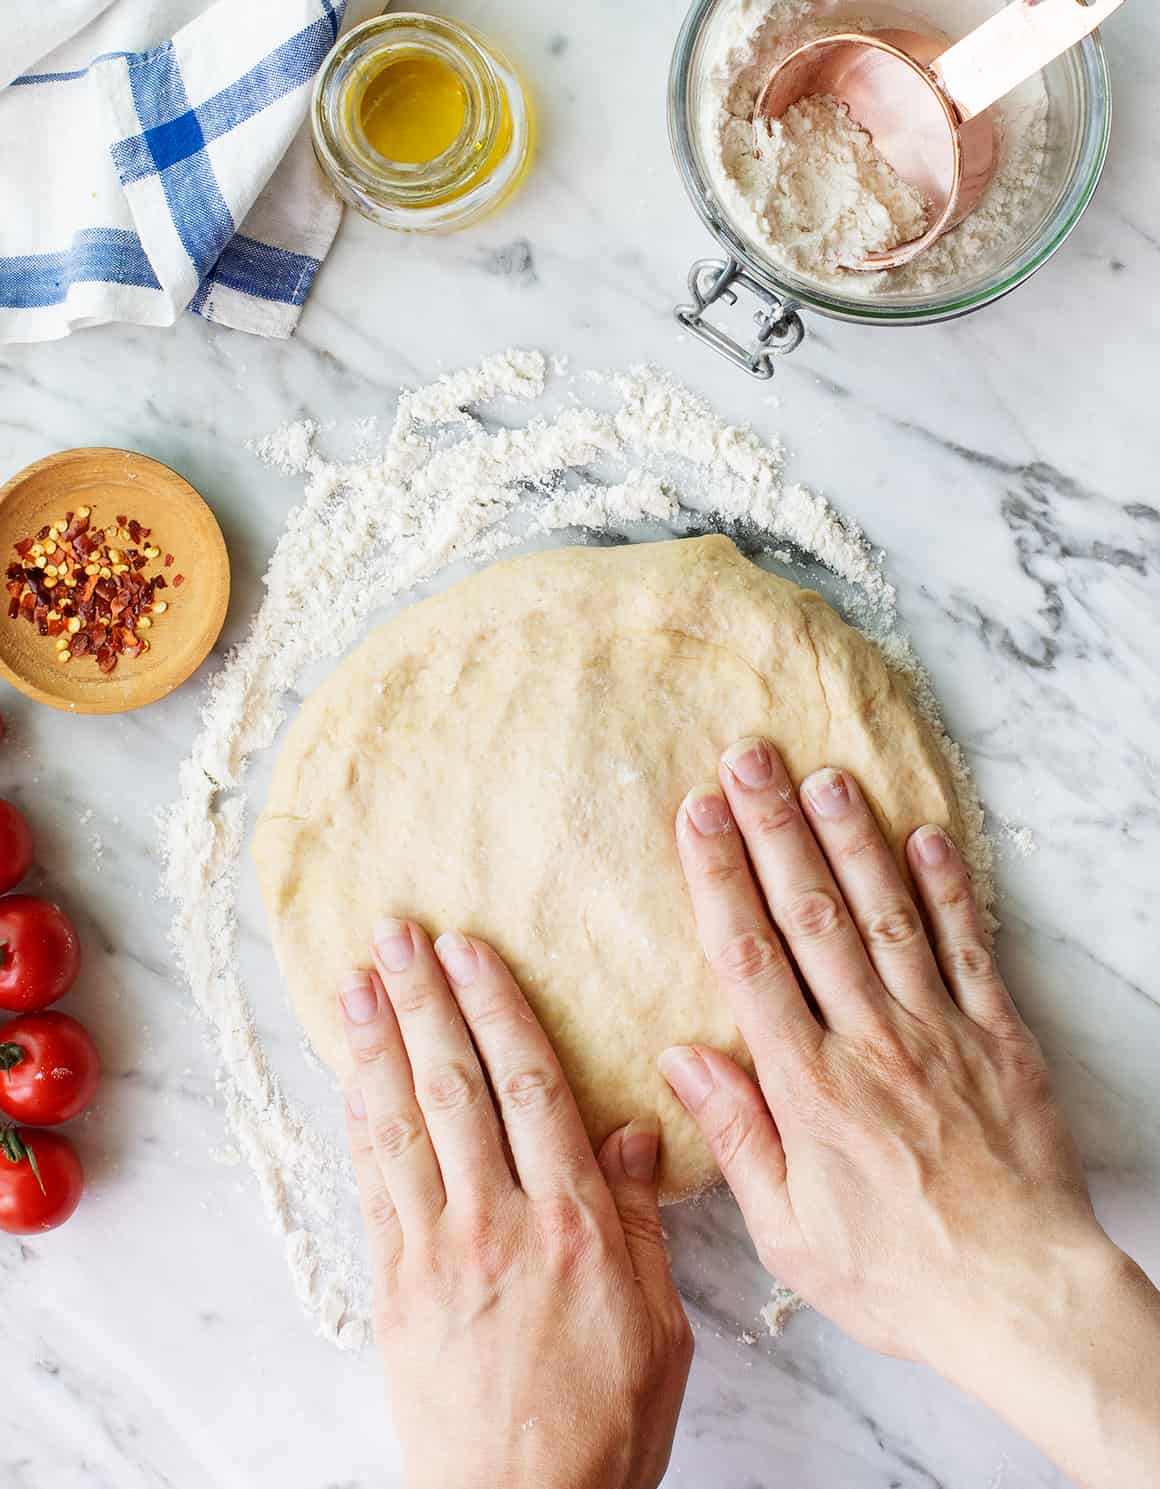 Shaping the pizza dough